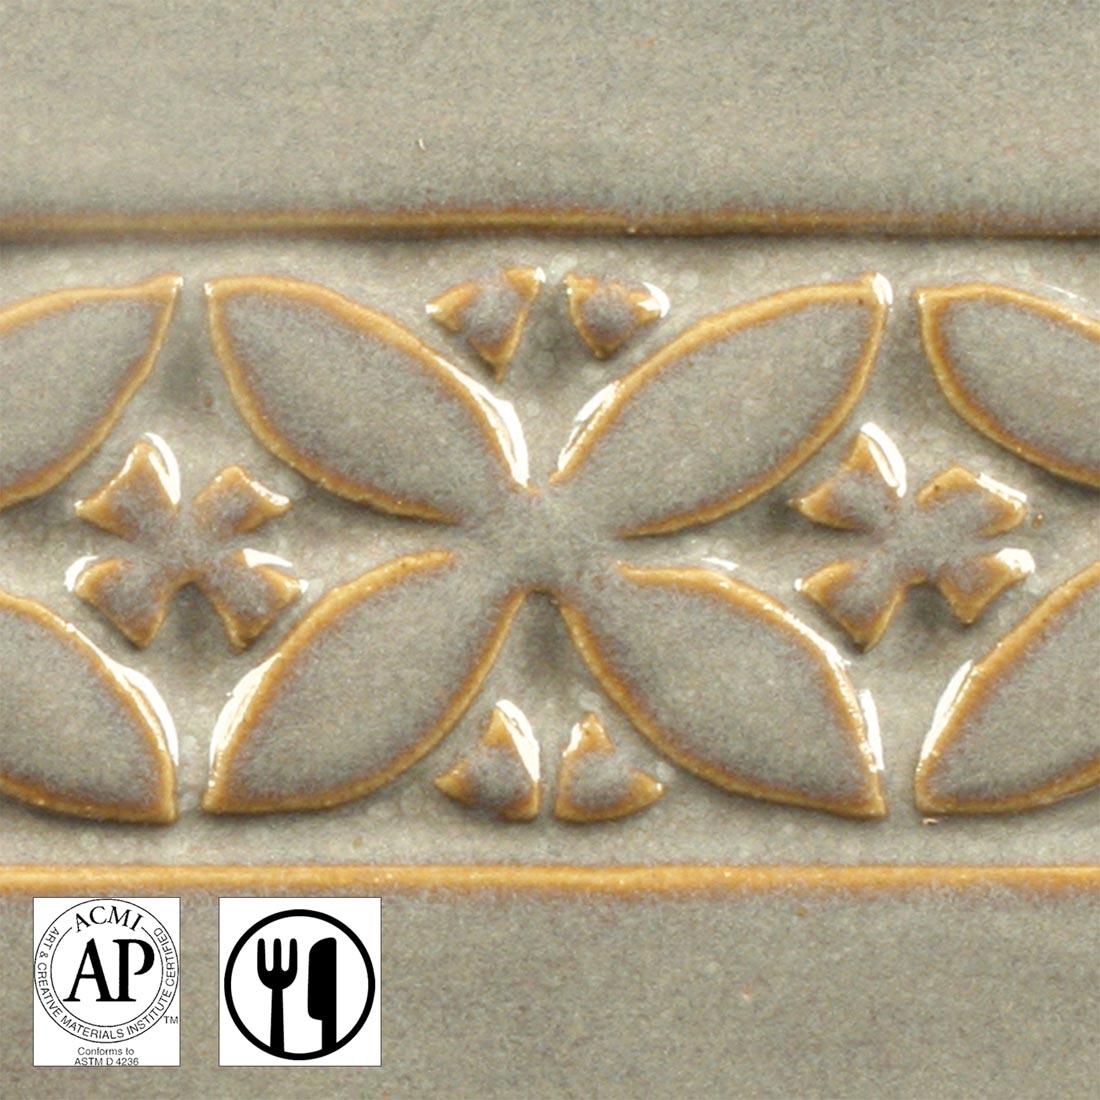 clay tile with Light Sepia AMACO Potter's Choice High Fire Glaze applied; symbols for AP Seal and food safe